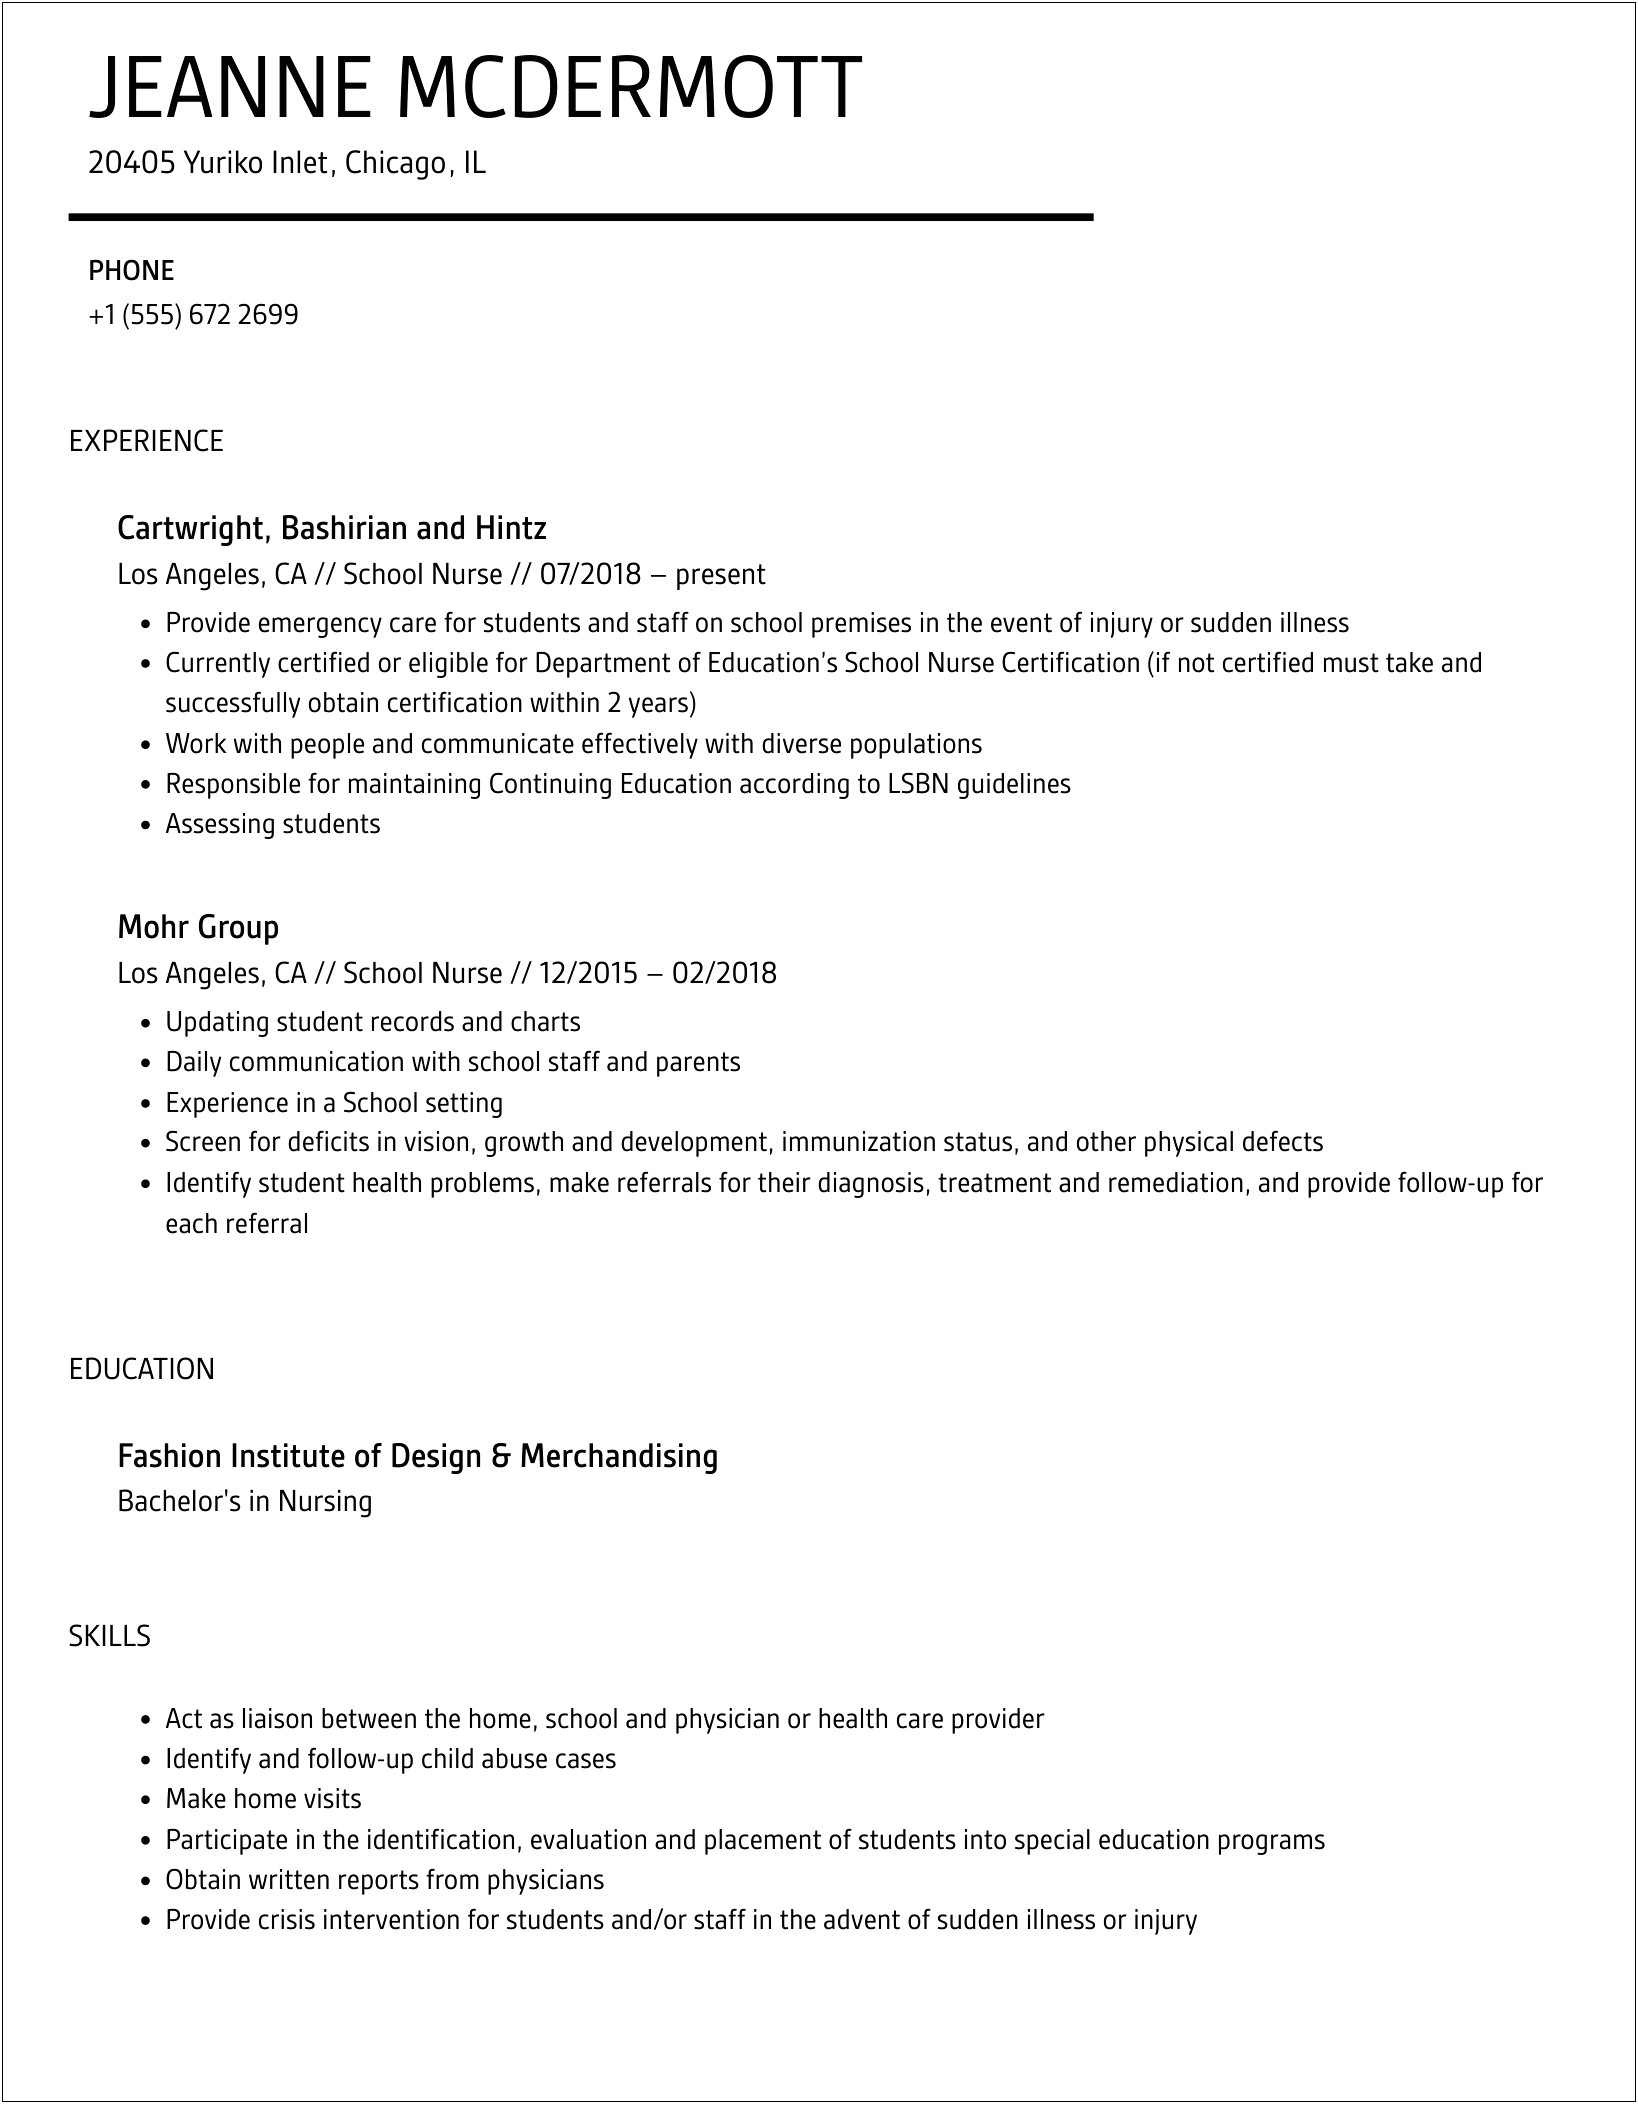 Template For Resume For School Nurse Position